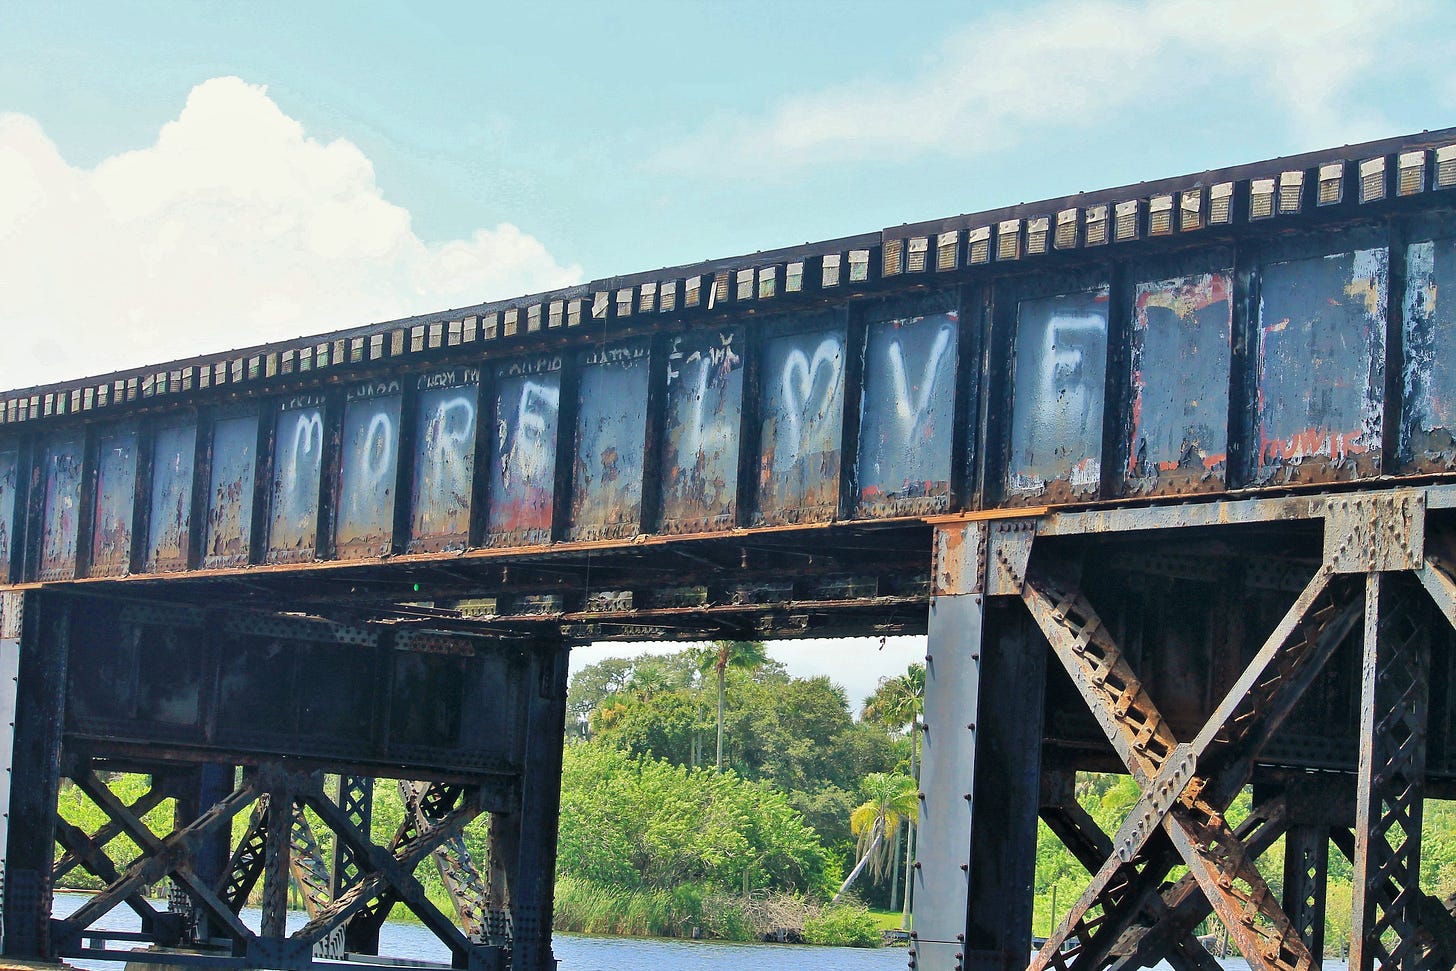 Old steel railroad bridge that says more love in white paint